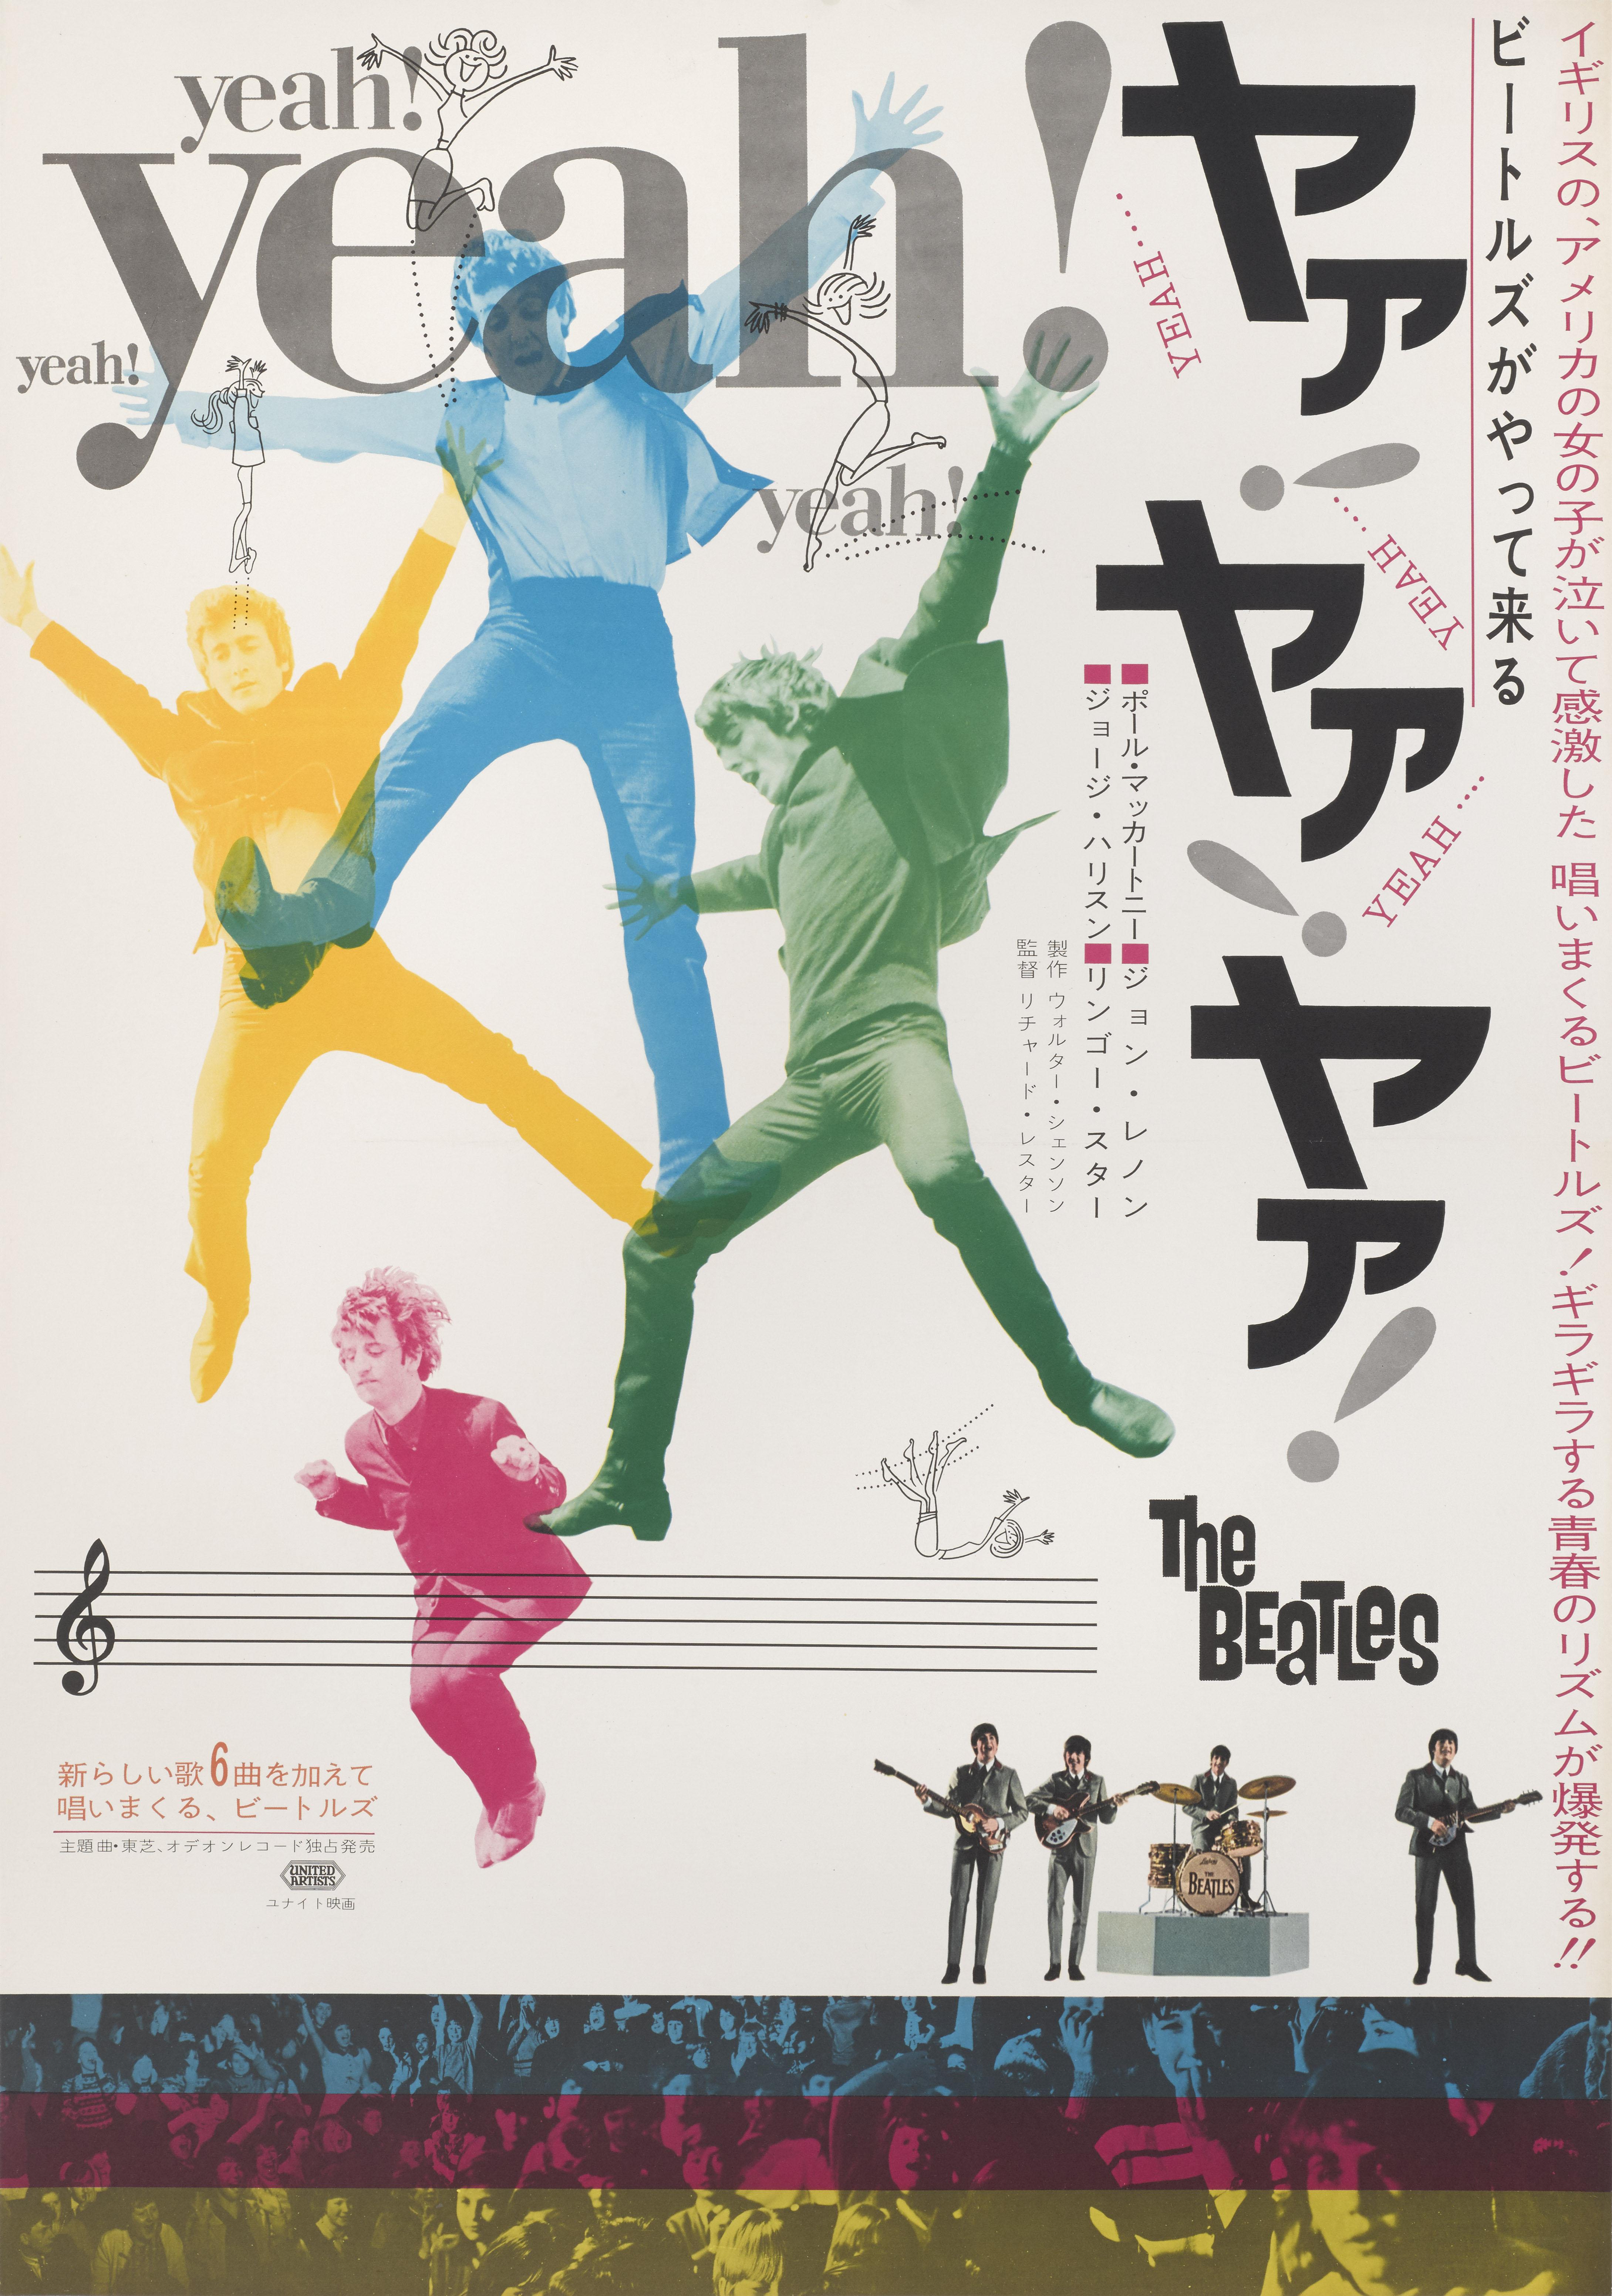 Original Japanese film poster for the British musical comedy, directed by Richard Lester, was released in 1964 at the peak of Beatle mania. The film stars The Beatles and comically shows two 'regular' days in their lives.. The poster is unfolded and